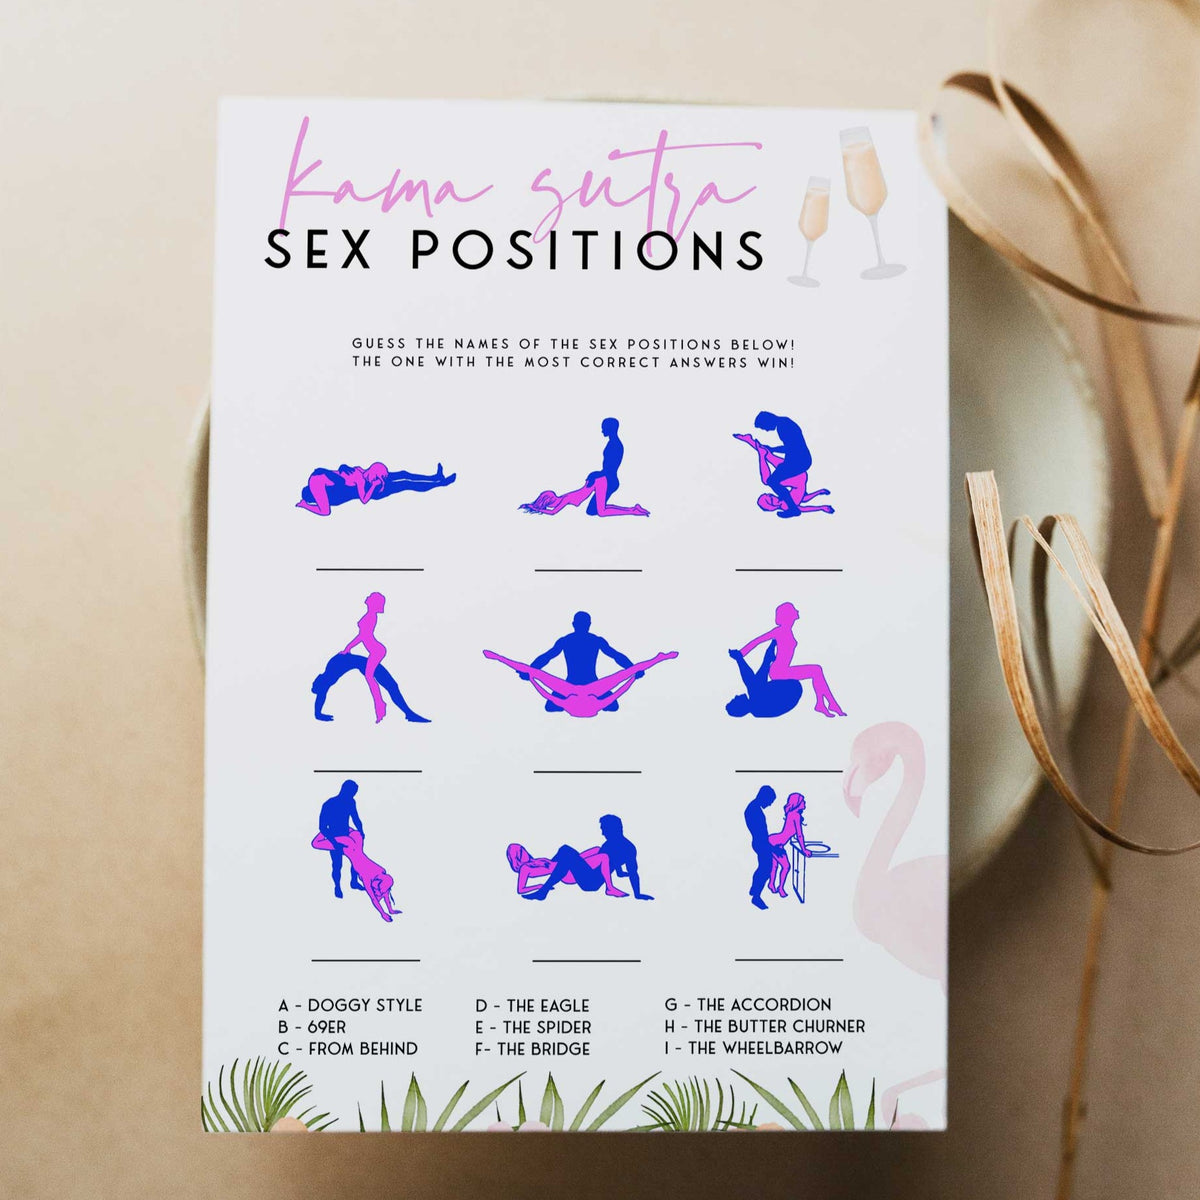 Fully editable and printable guess the sex positions game with a miami design. Perfect for a miami, Bachelorette themed party